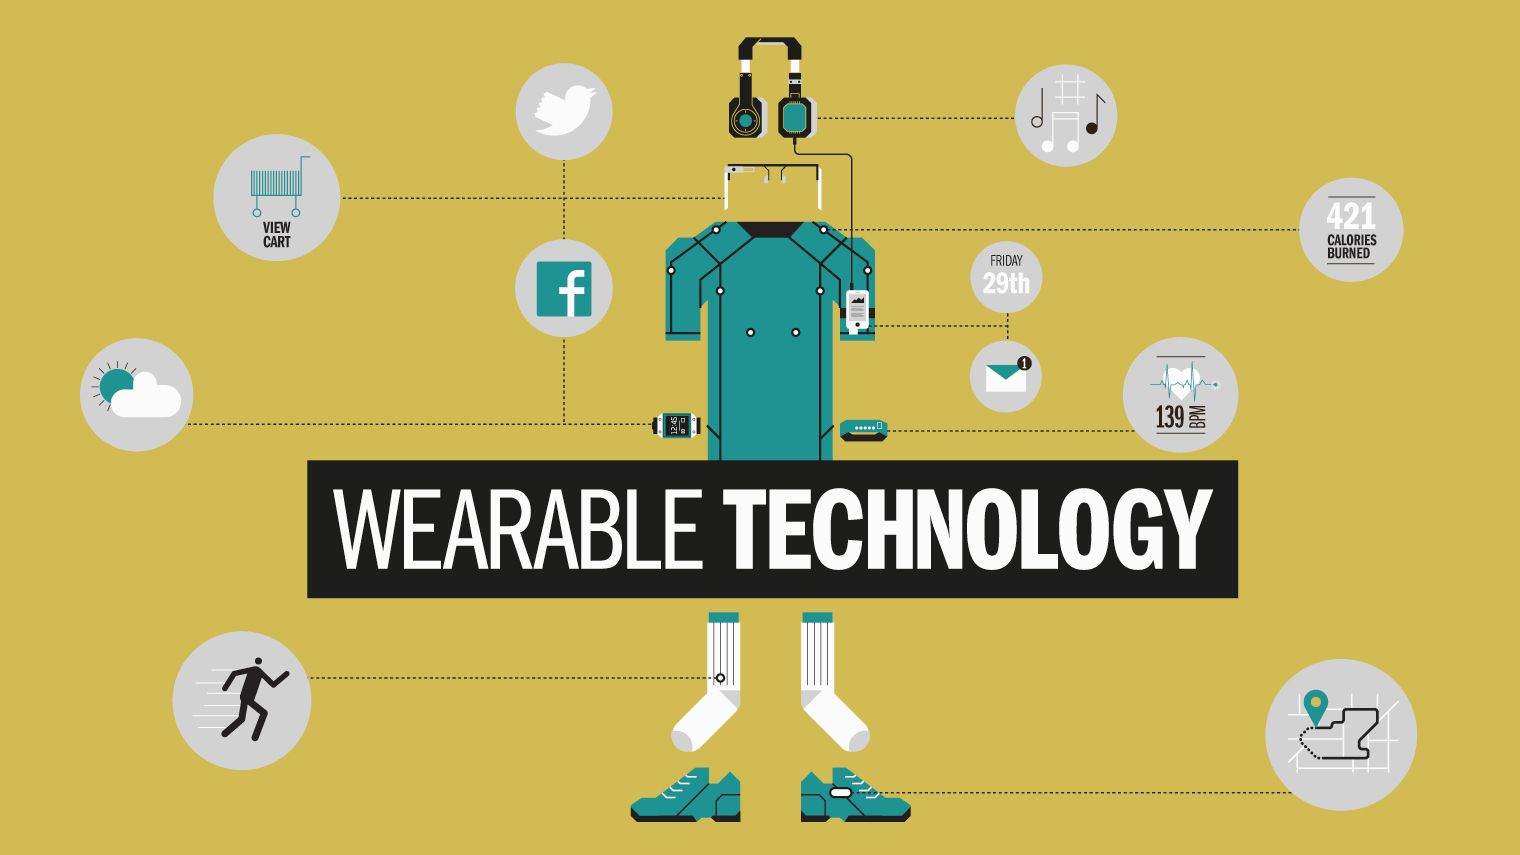 Screenless wearables and new means of interaction